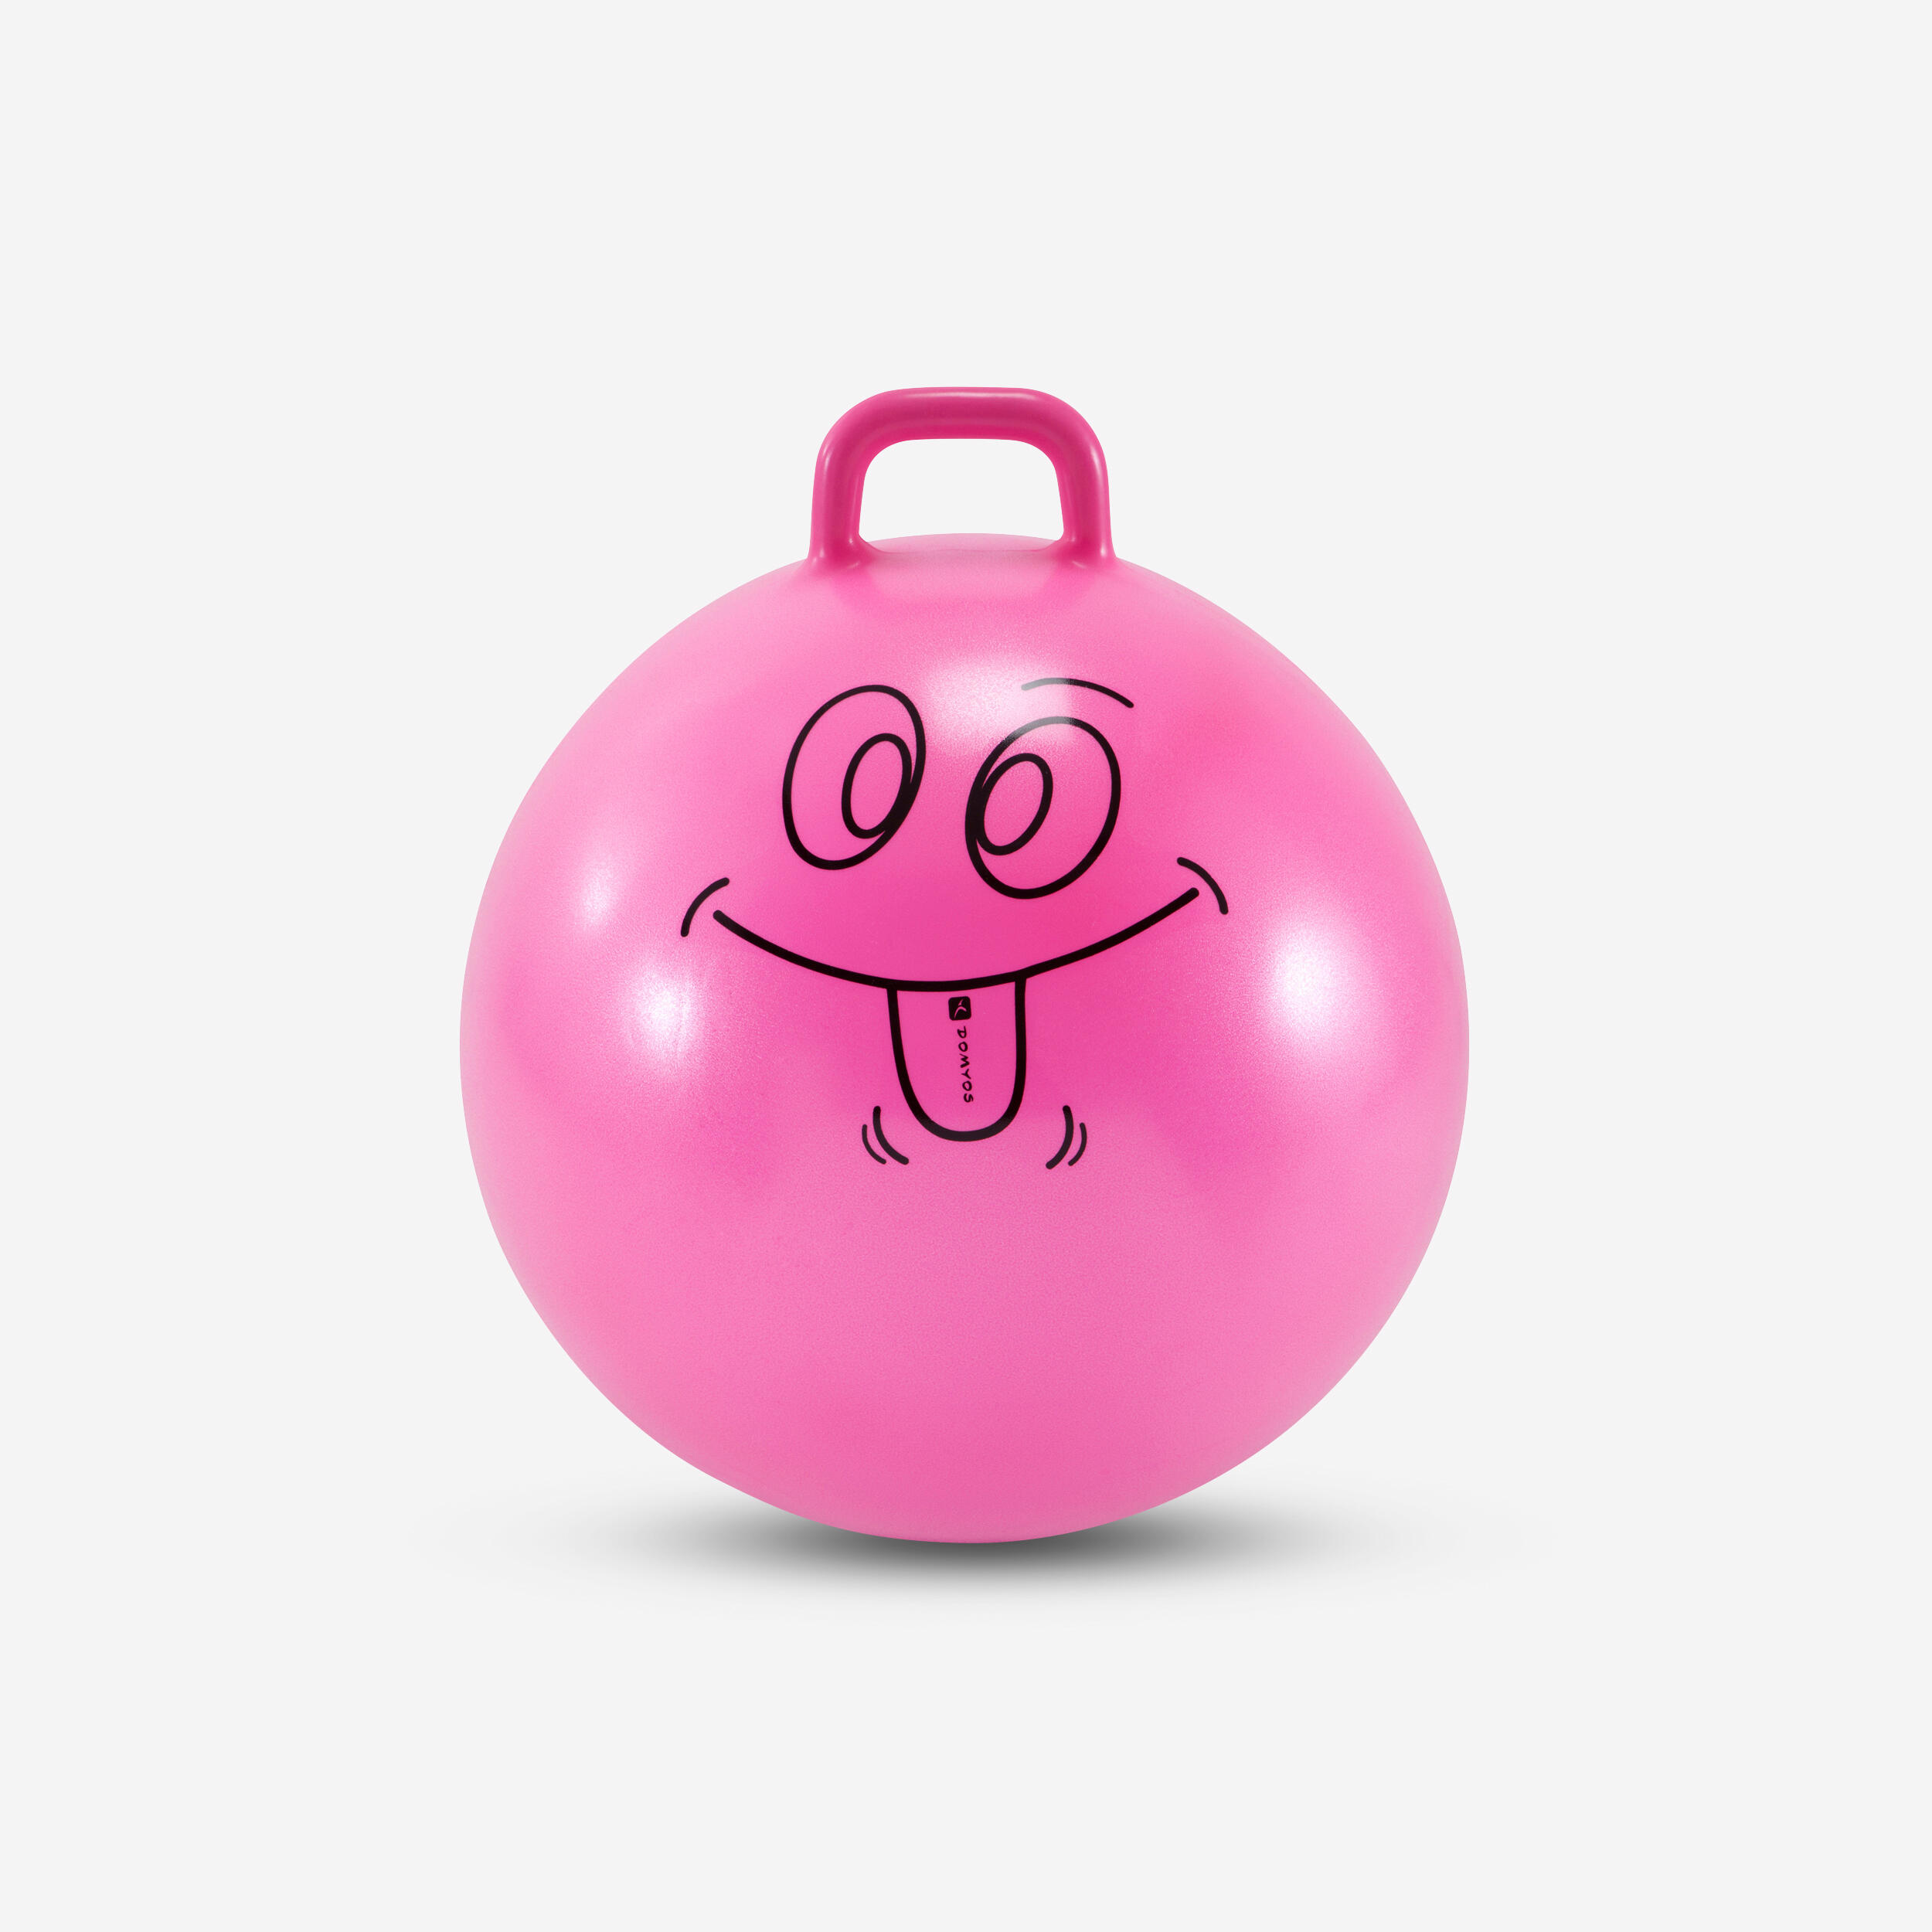 space hopper for 7 year old